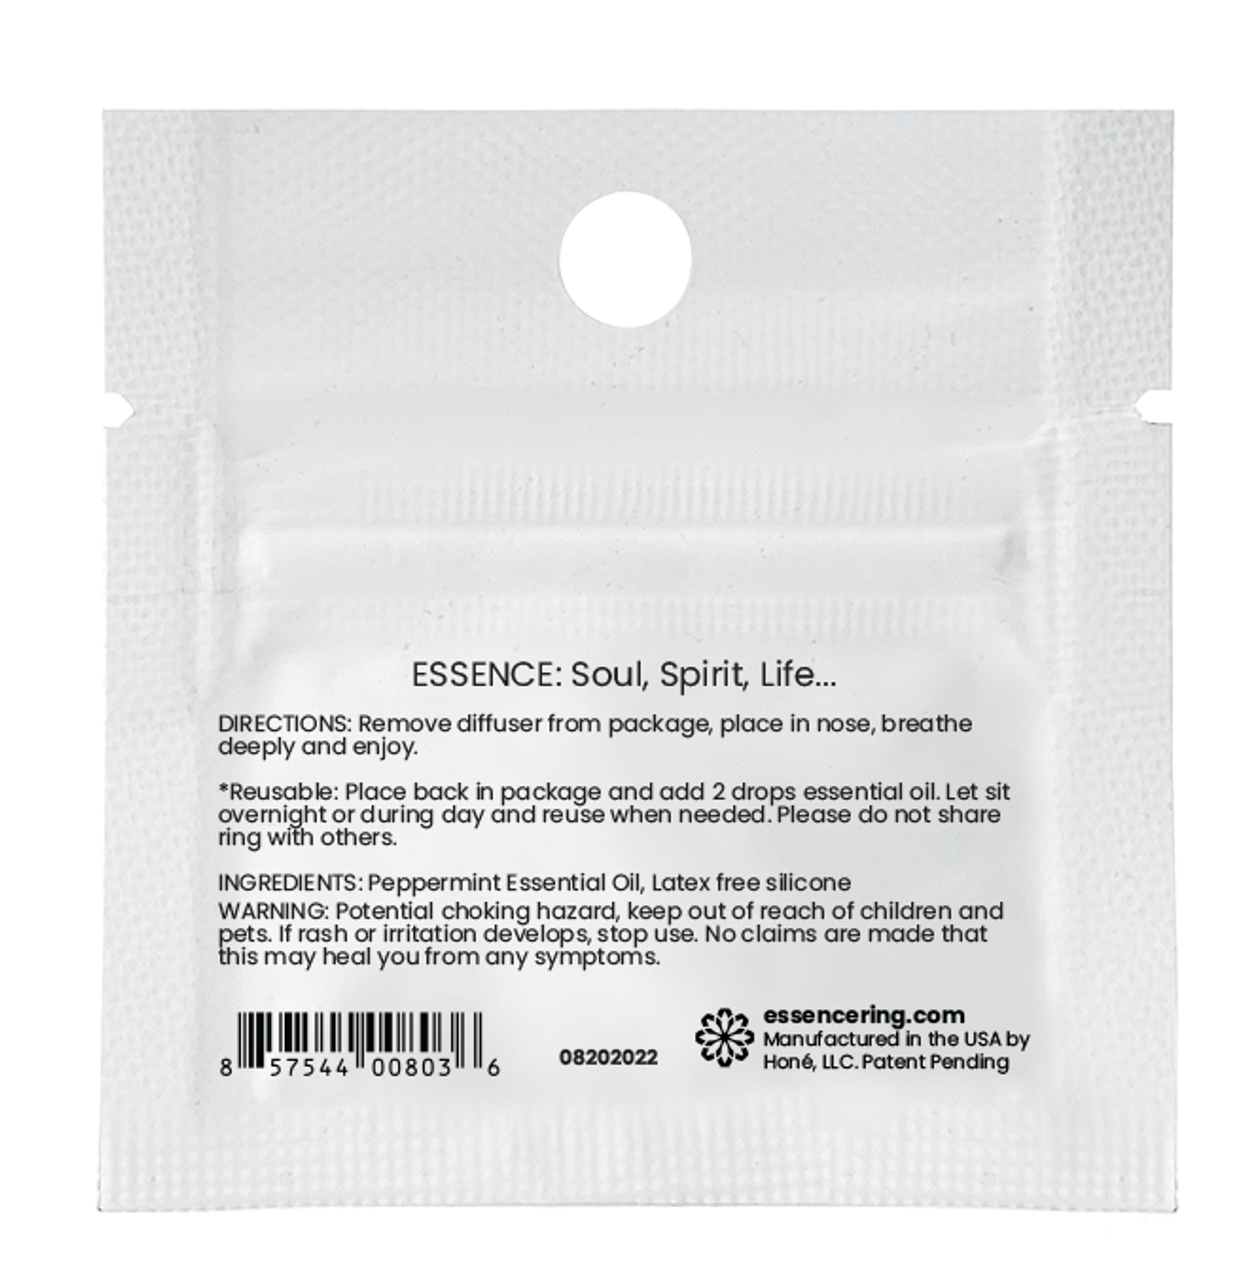 Essence Peppermint Essential Oil Infused Wearable Diffuser Back Packaging